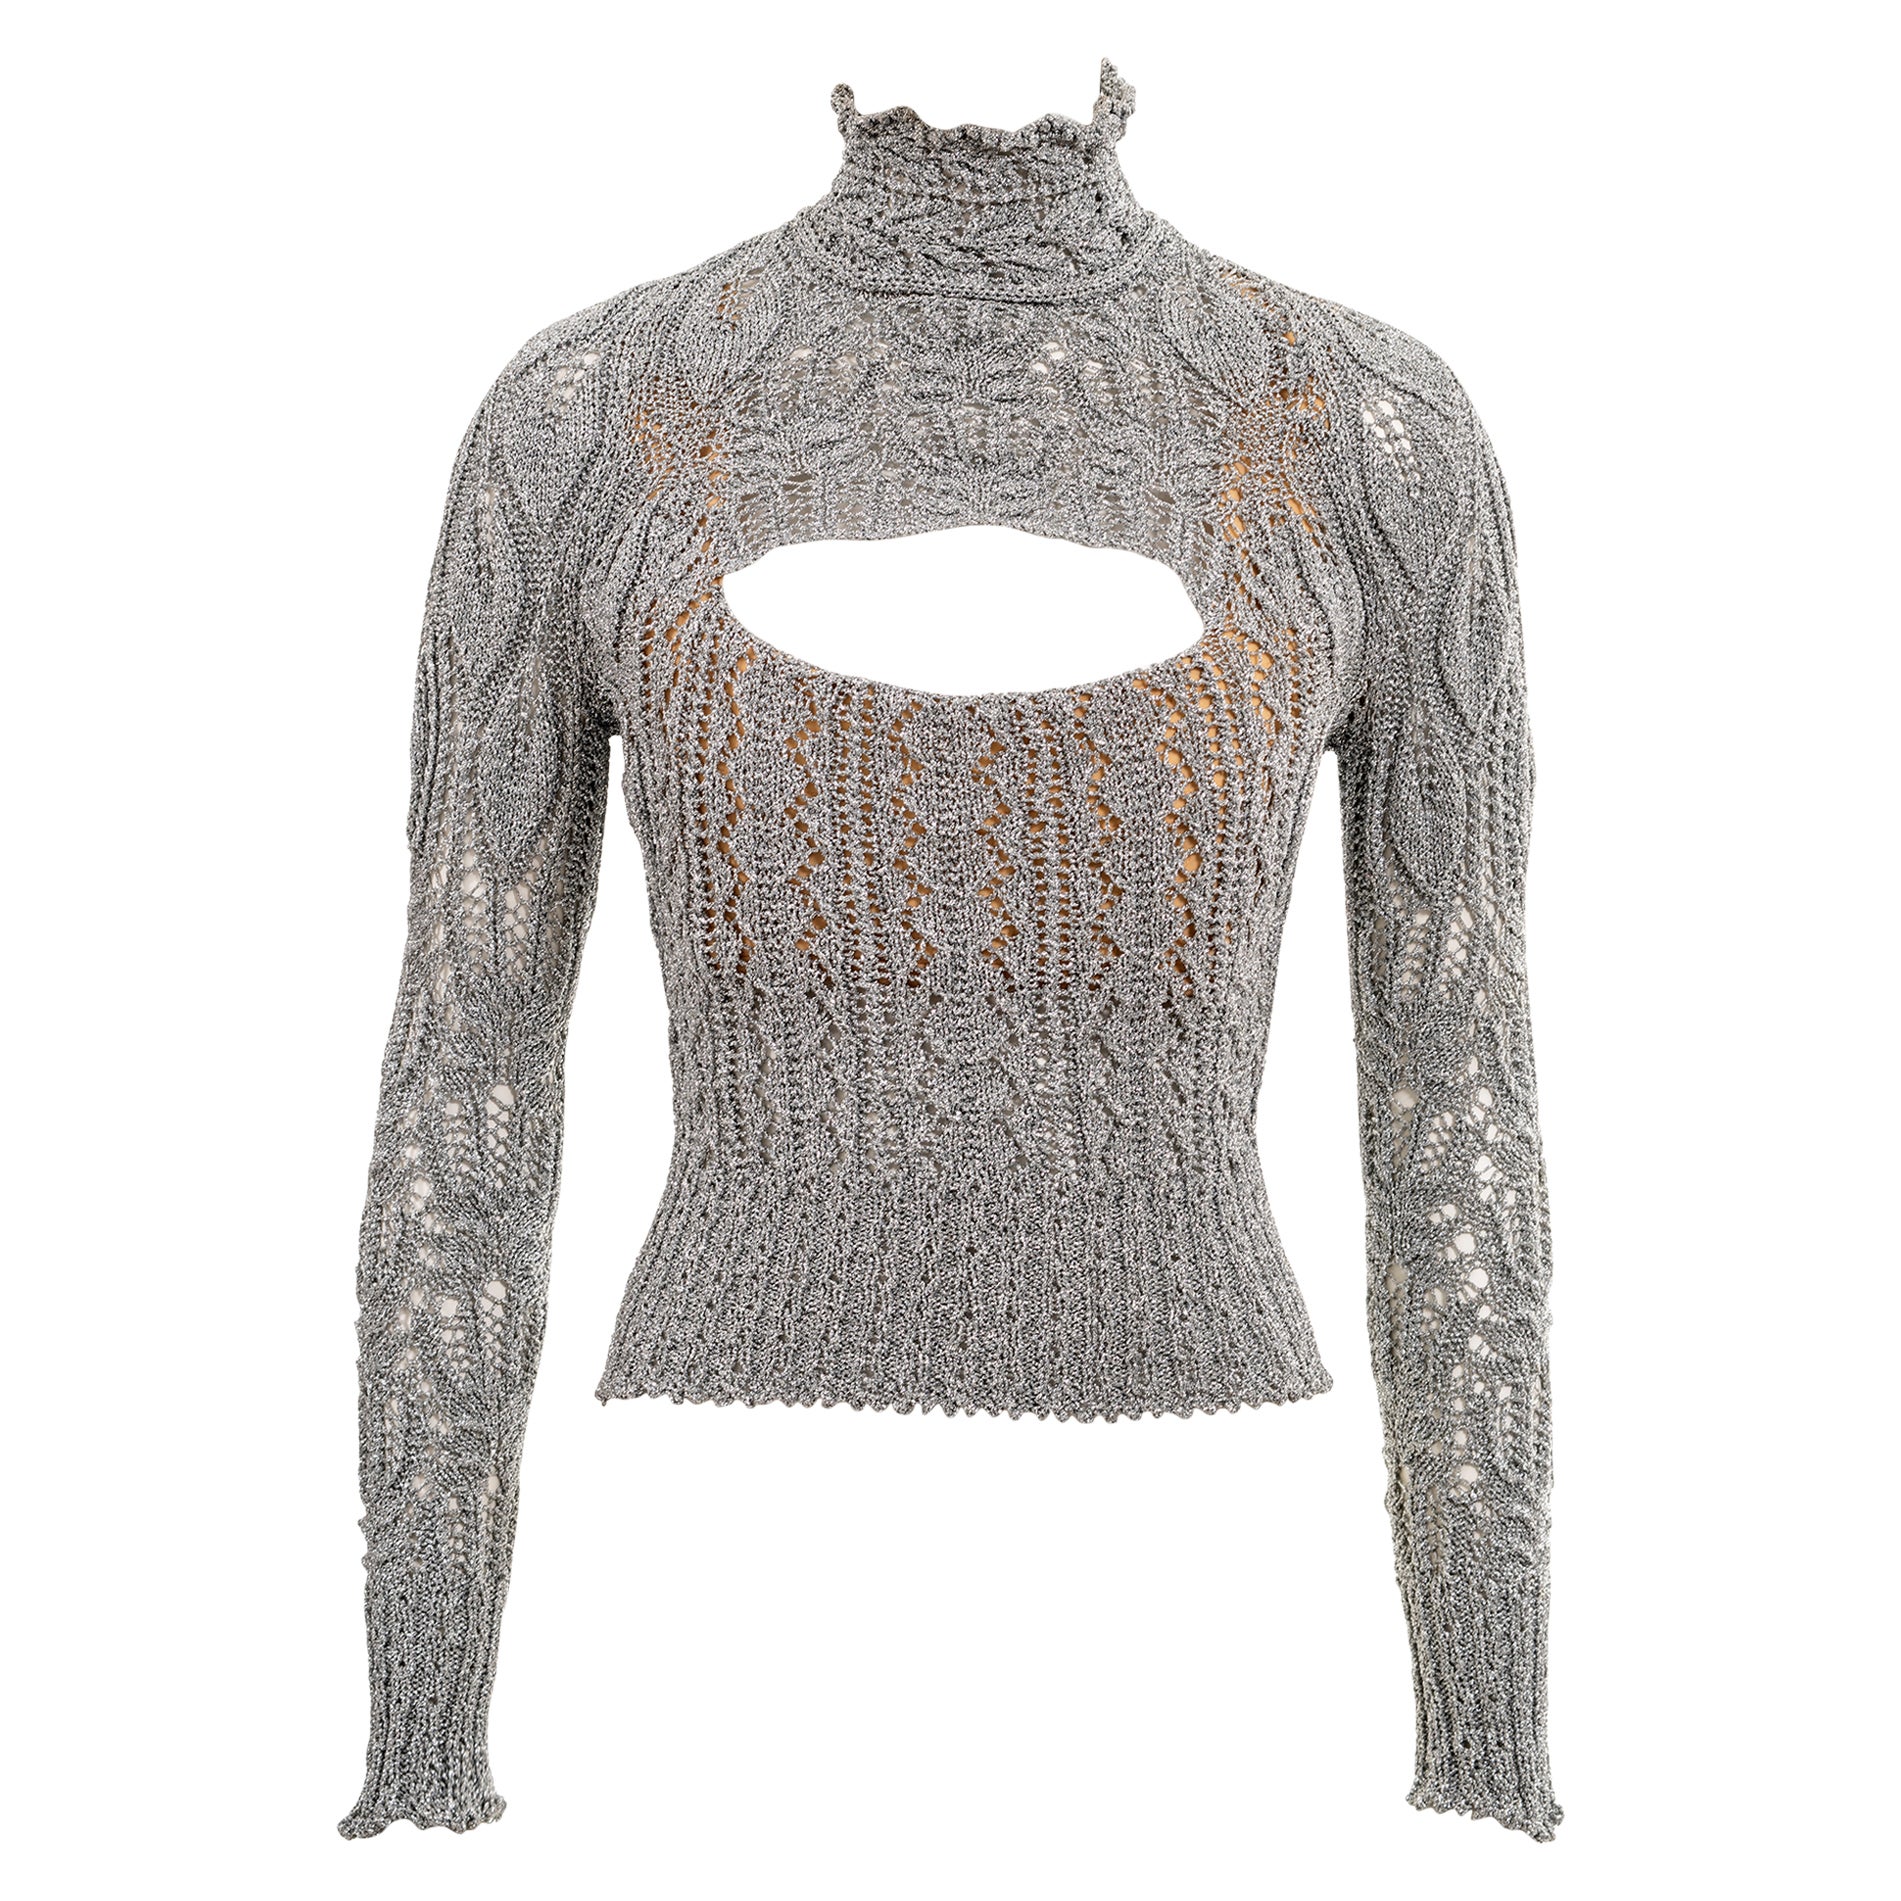 Vivienne Westwood metallic silver knitted corset sweater, fw 1993